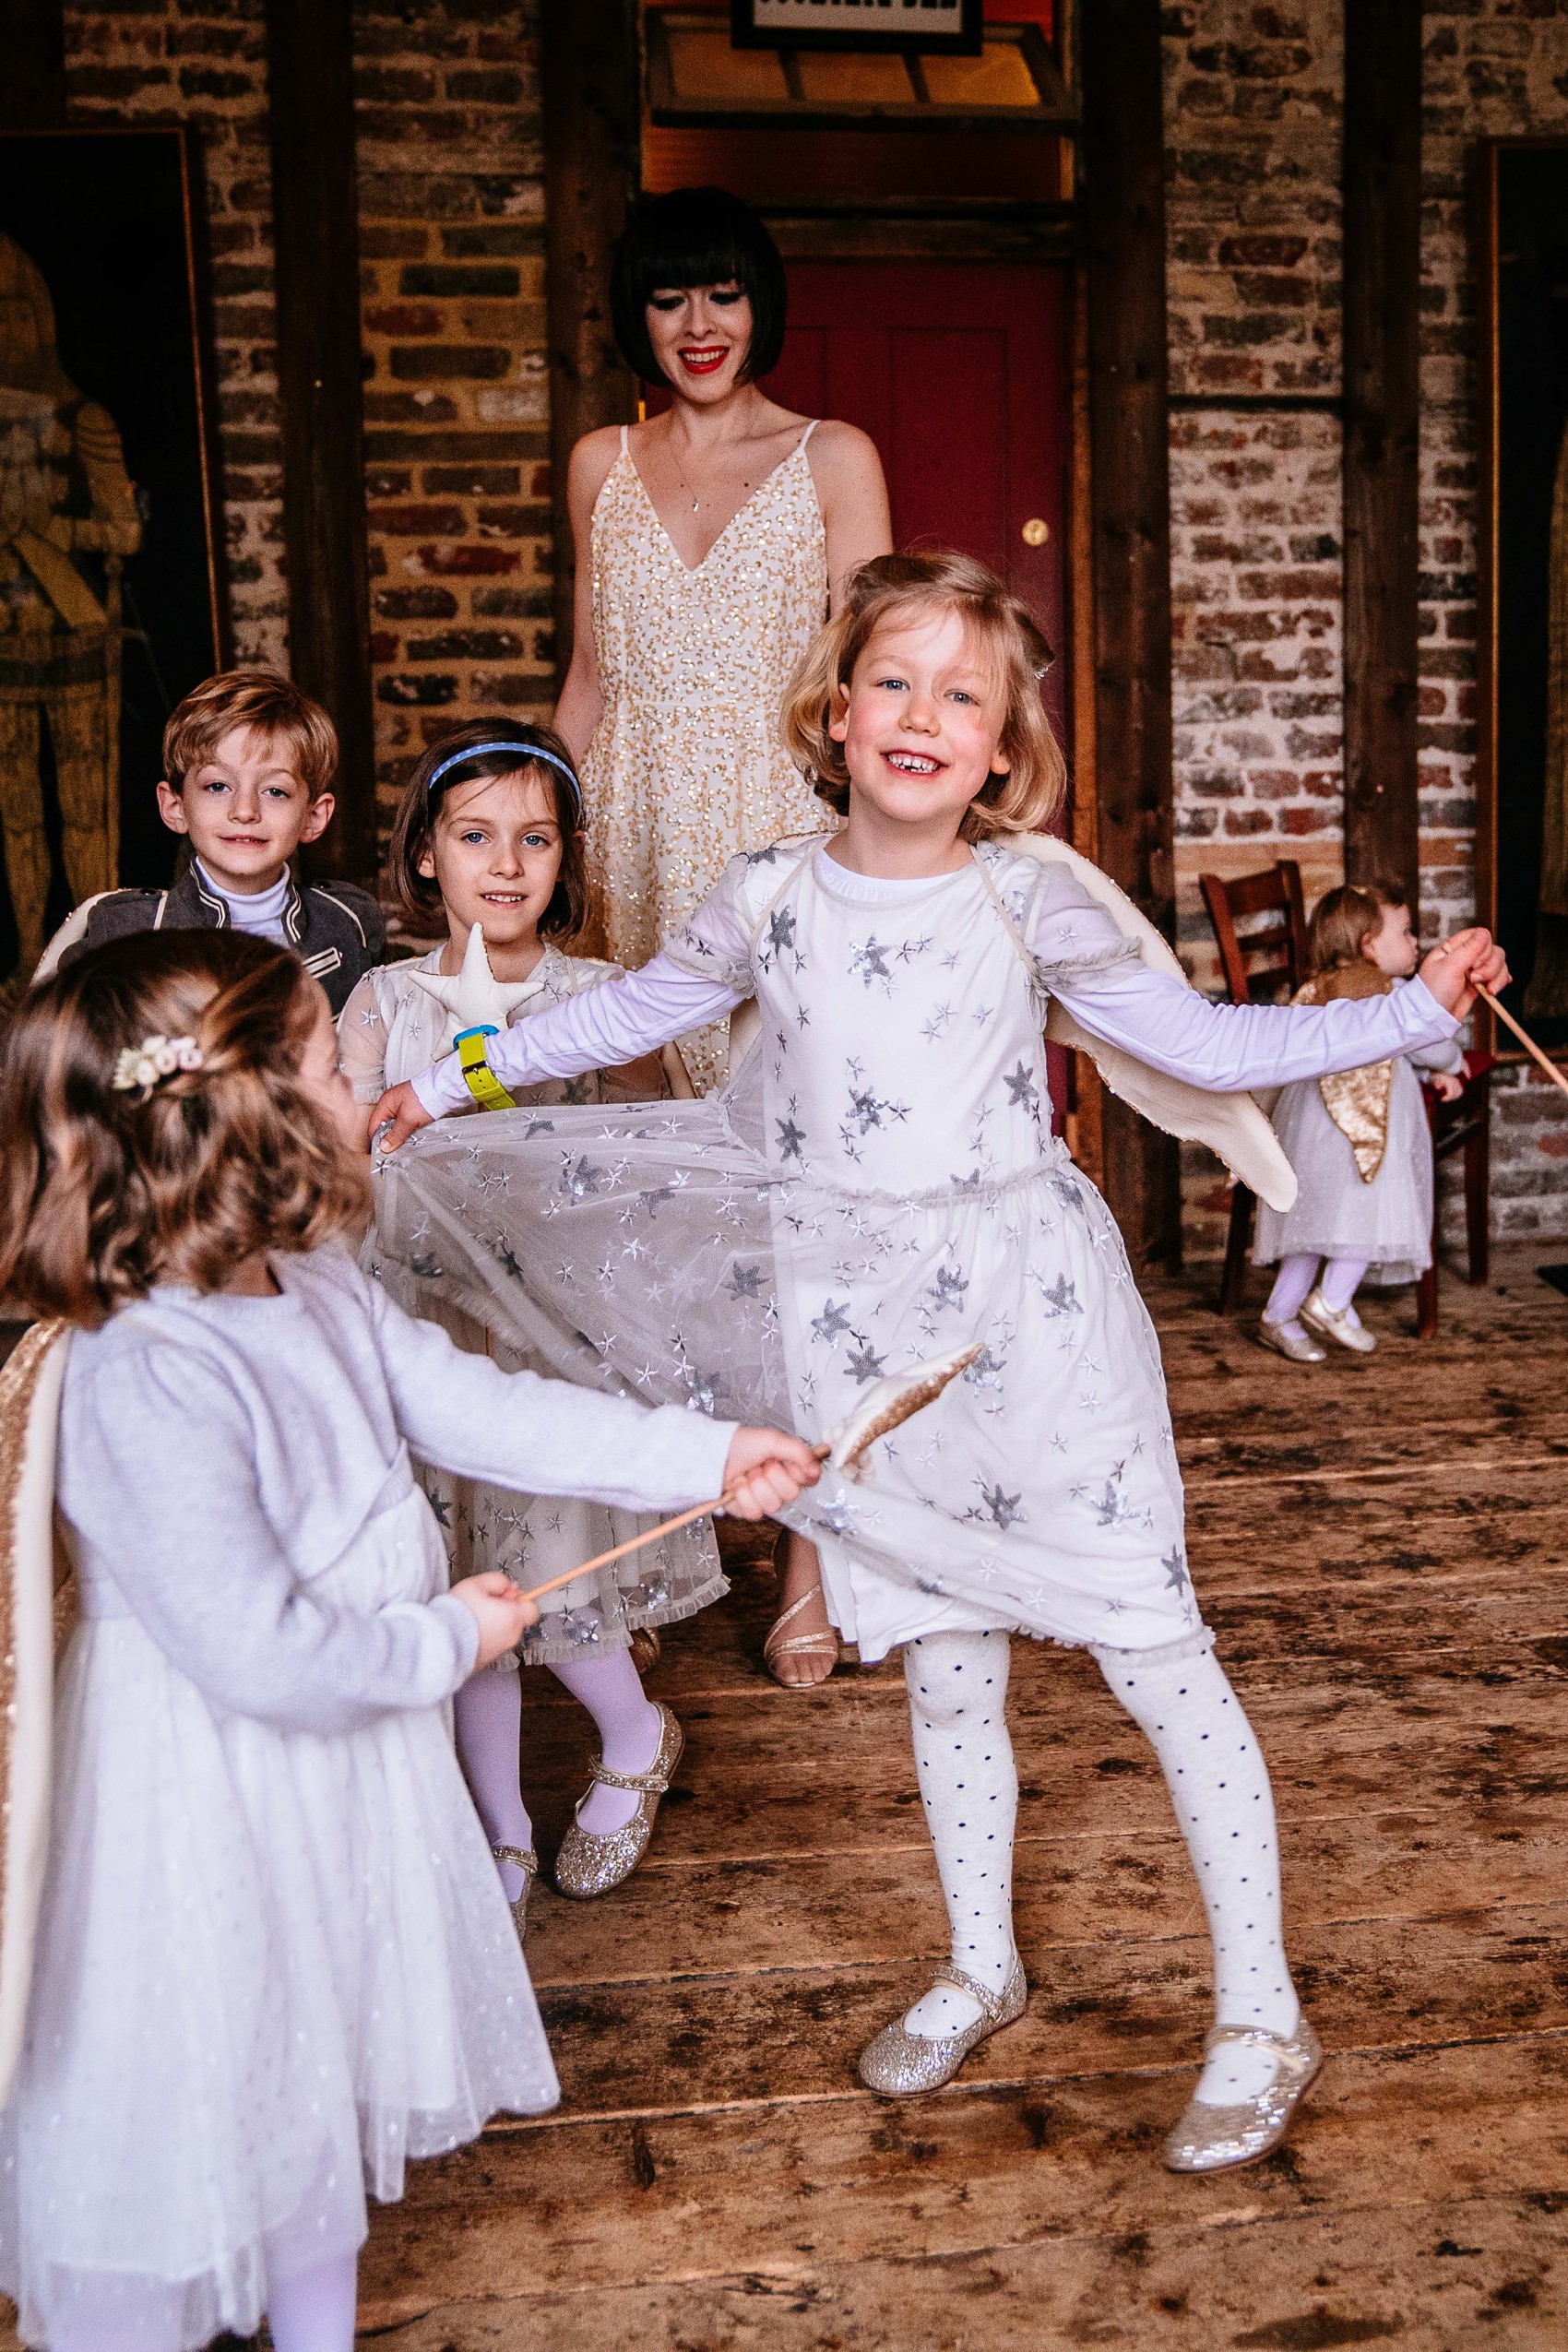  Wiltons Hall Wedding Bo Luca bride - A Bo & Luca Bride in a Floral Crown for a Beautiful, Blended Family Wedding at Wilton's Music Hall